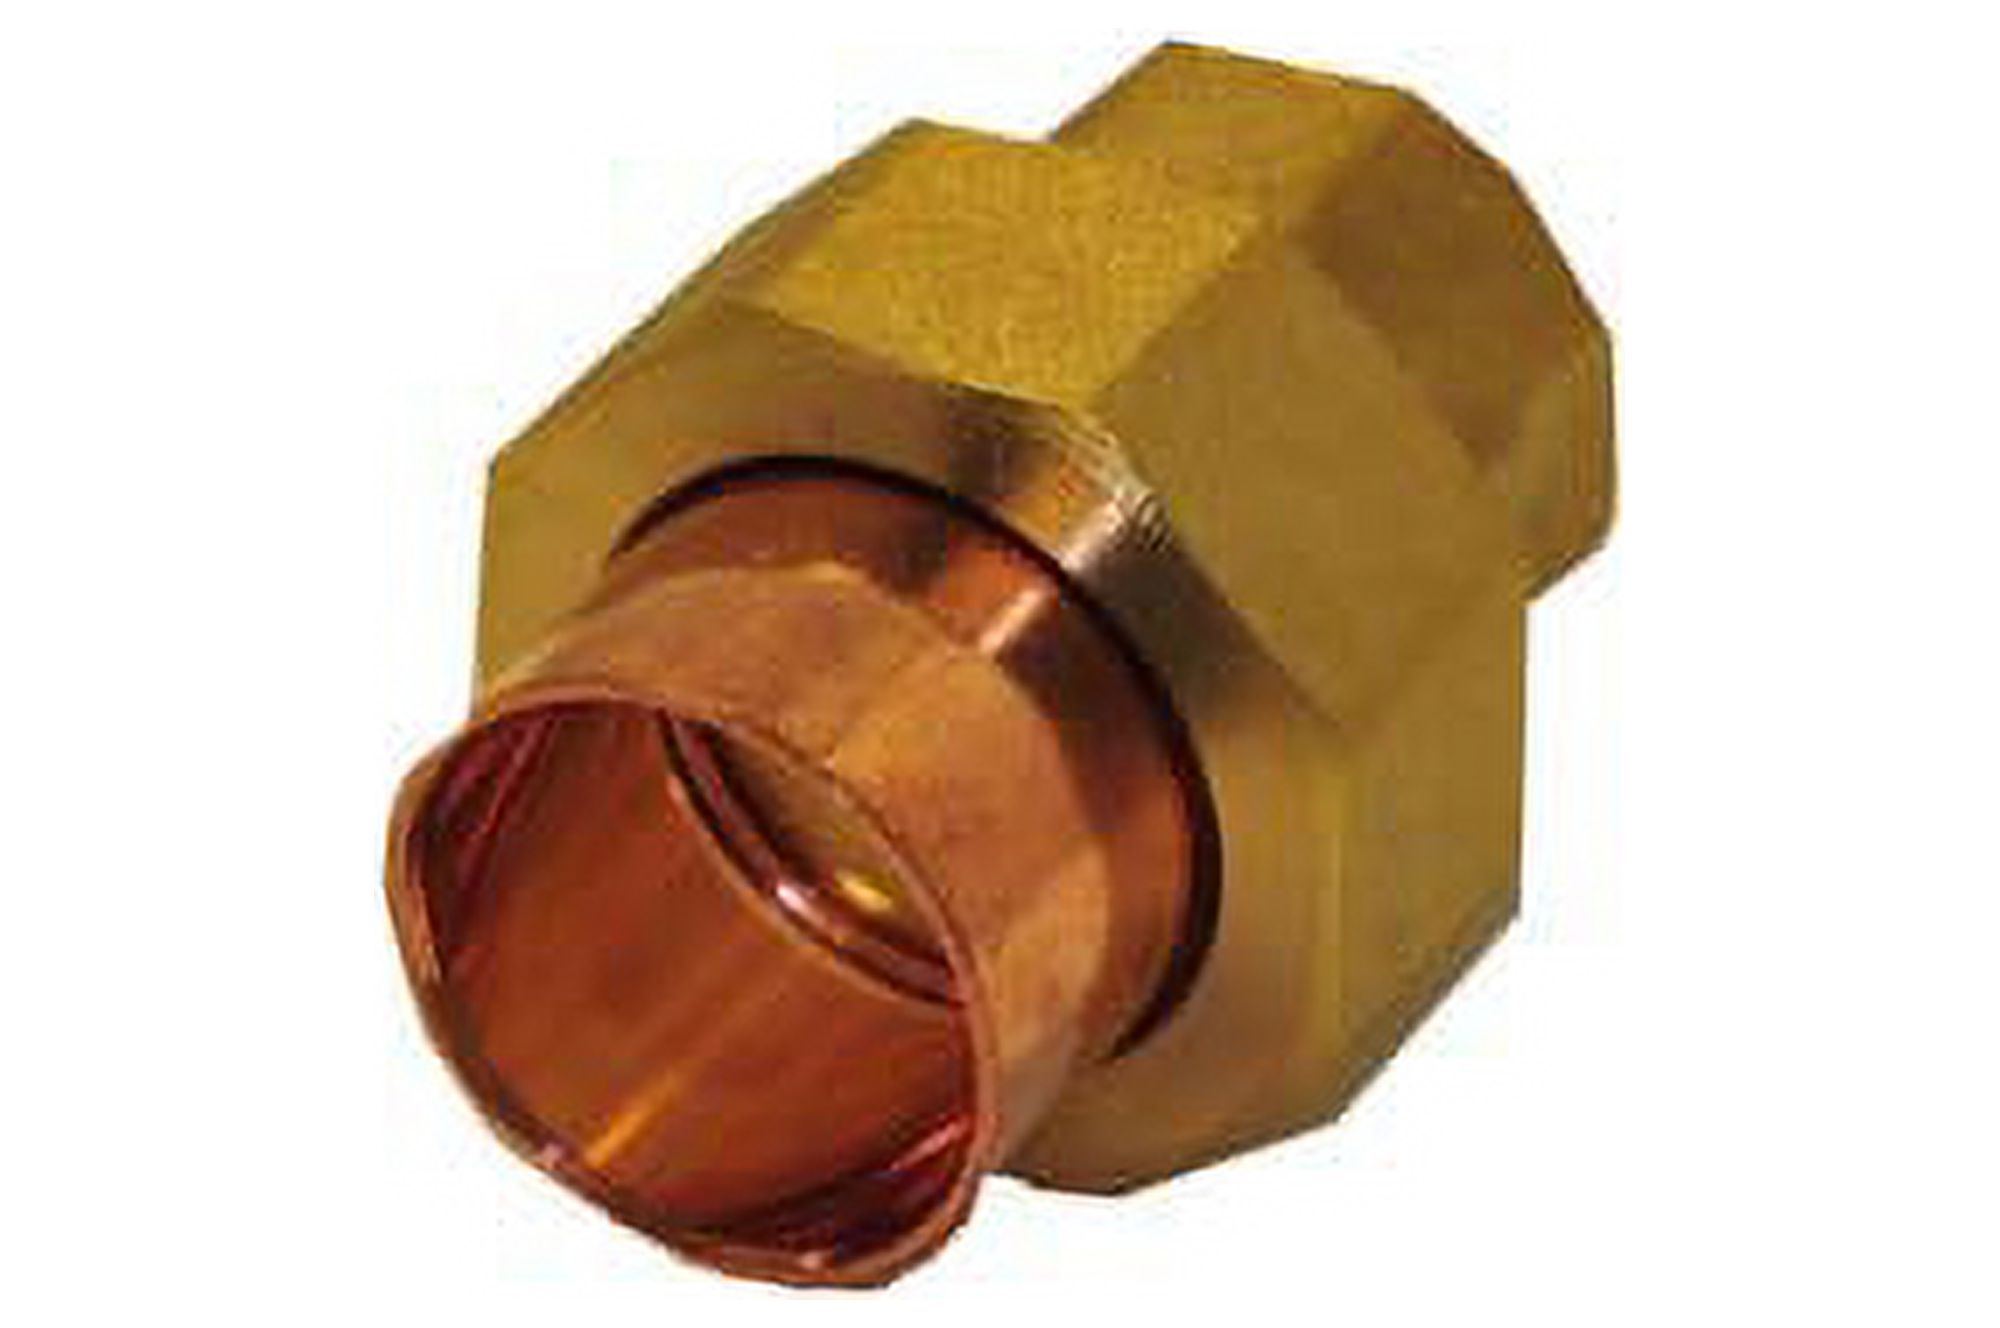 Libra Supply 1-1/2 inch Lead Free Copper Sweat Union C x C (Copper + Brass + Copper) Solder Joint, (click in for more size options)1-1/2'' Copper Pressure Pipe Fitting Plumbing Supply - image 2 of 3